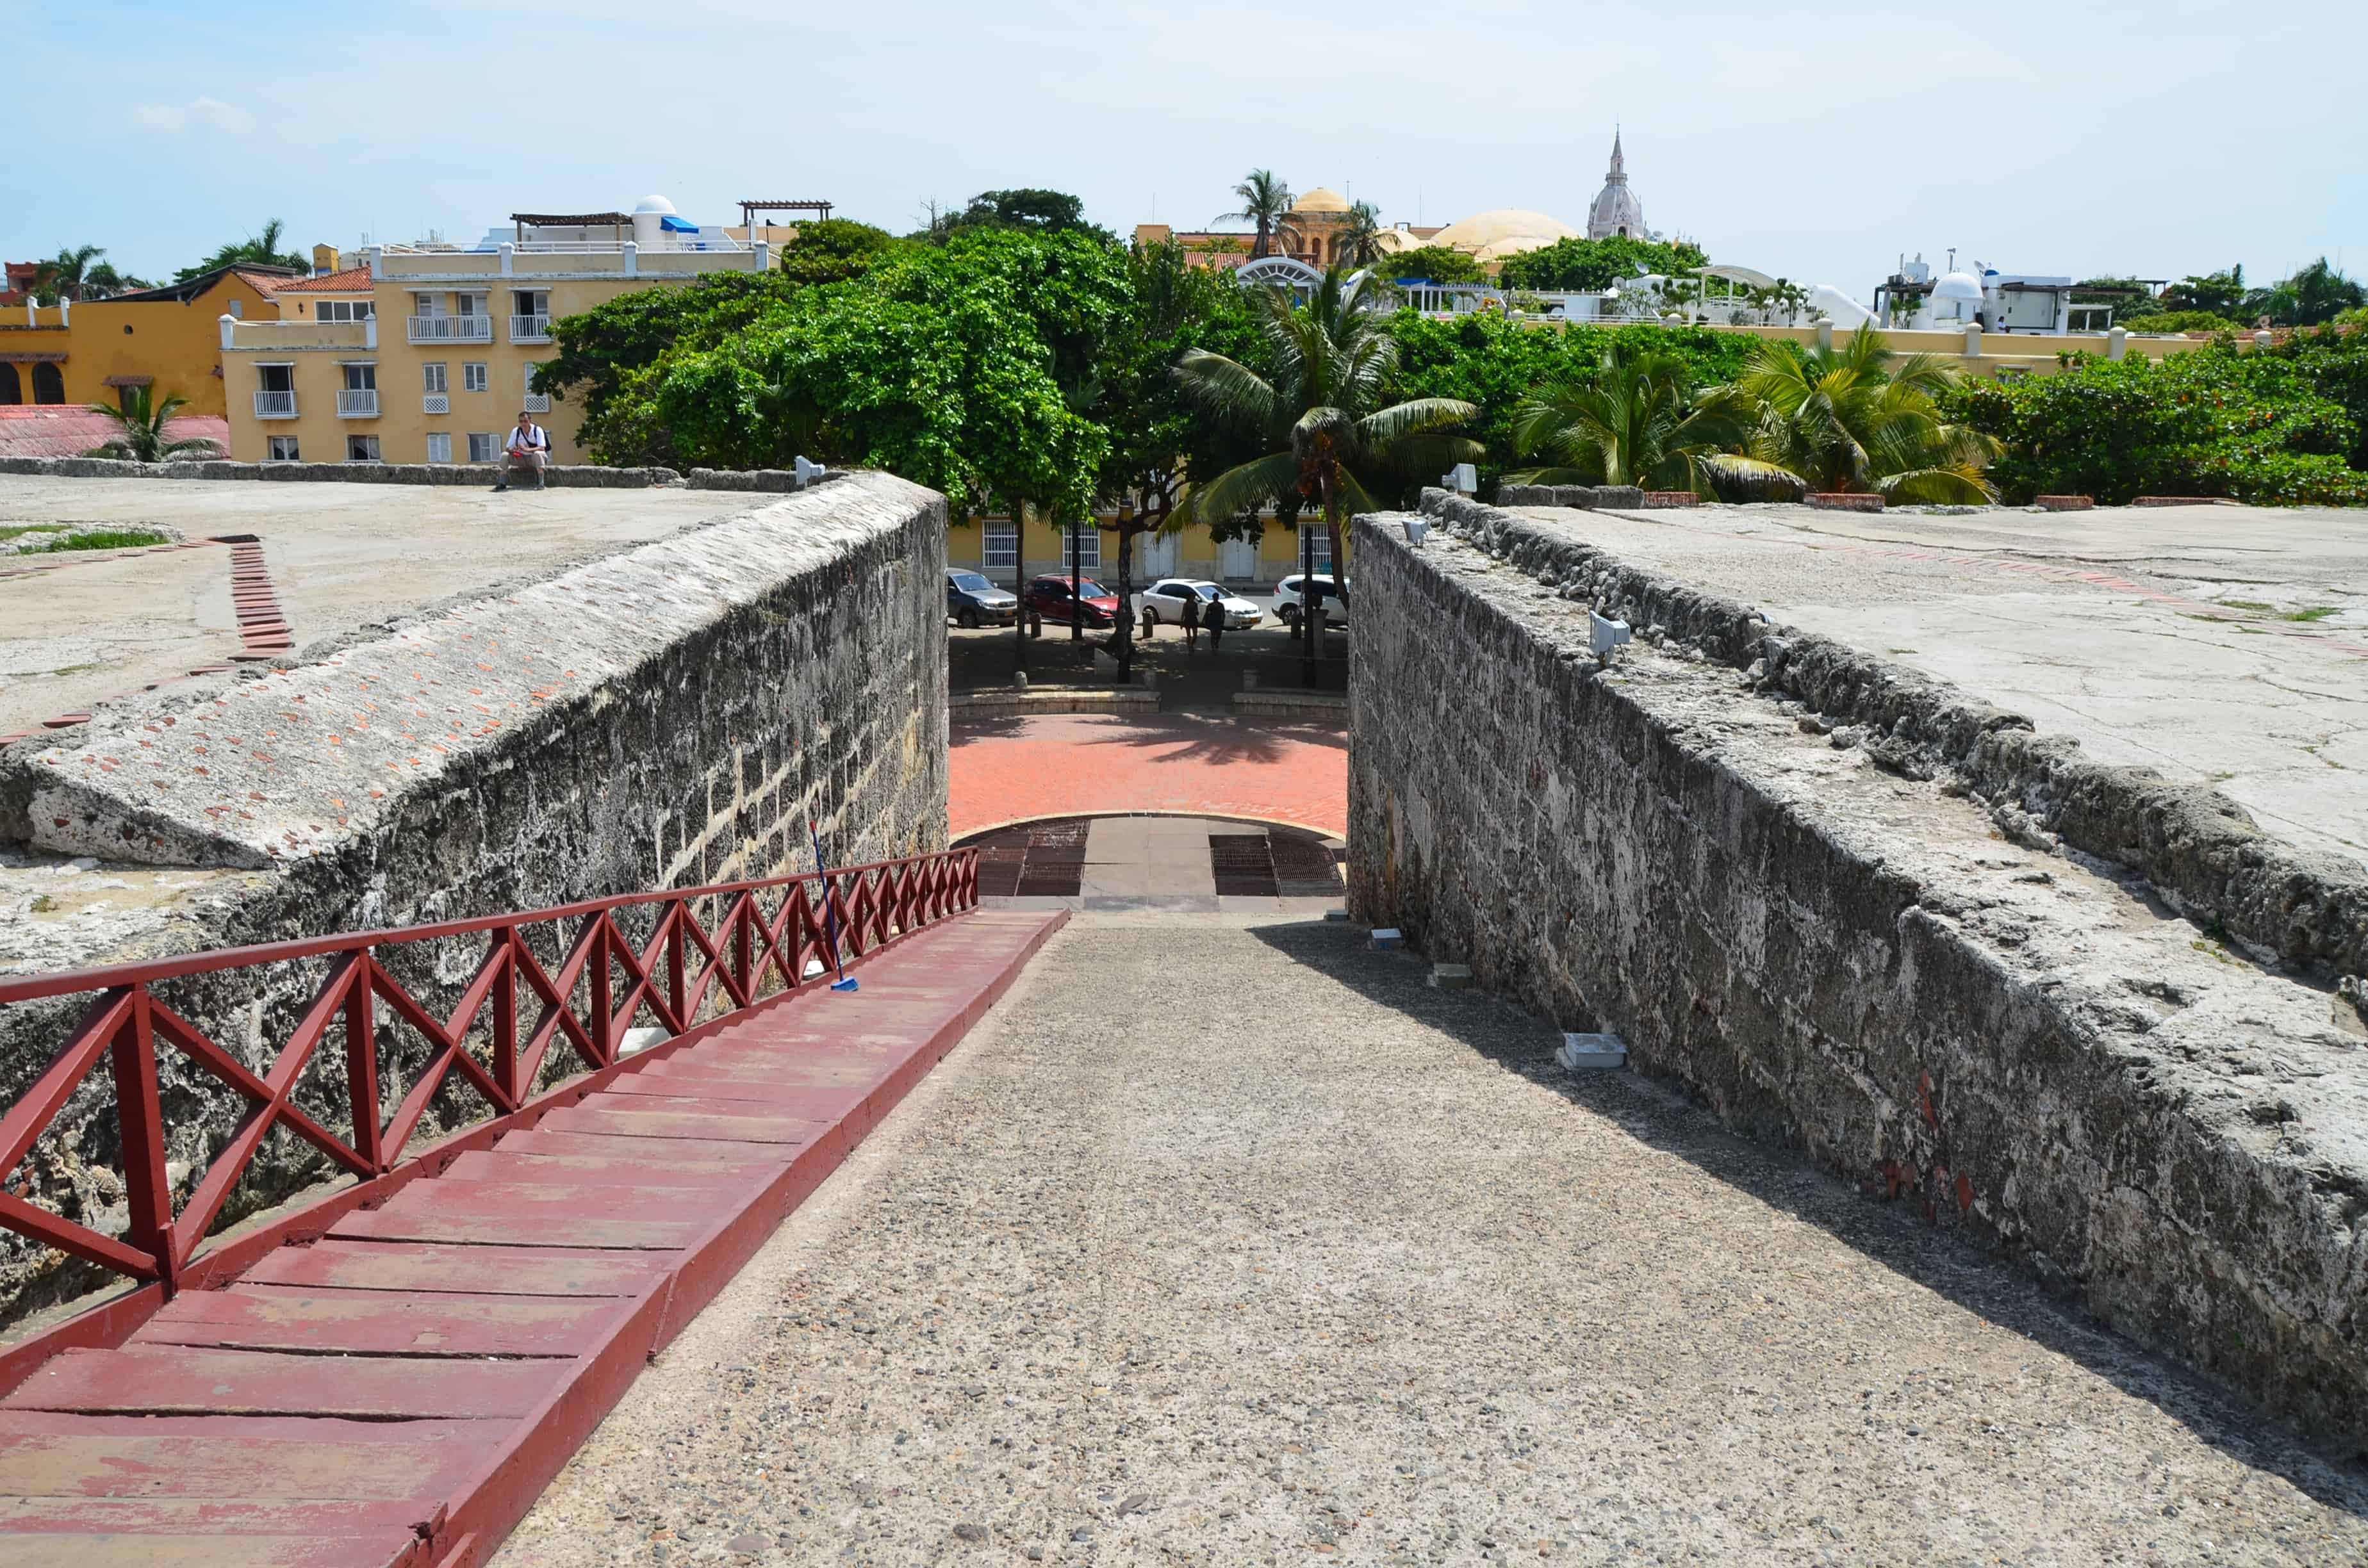 A ramp on the walls of Cartagena, Bolívar, Colombia